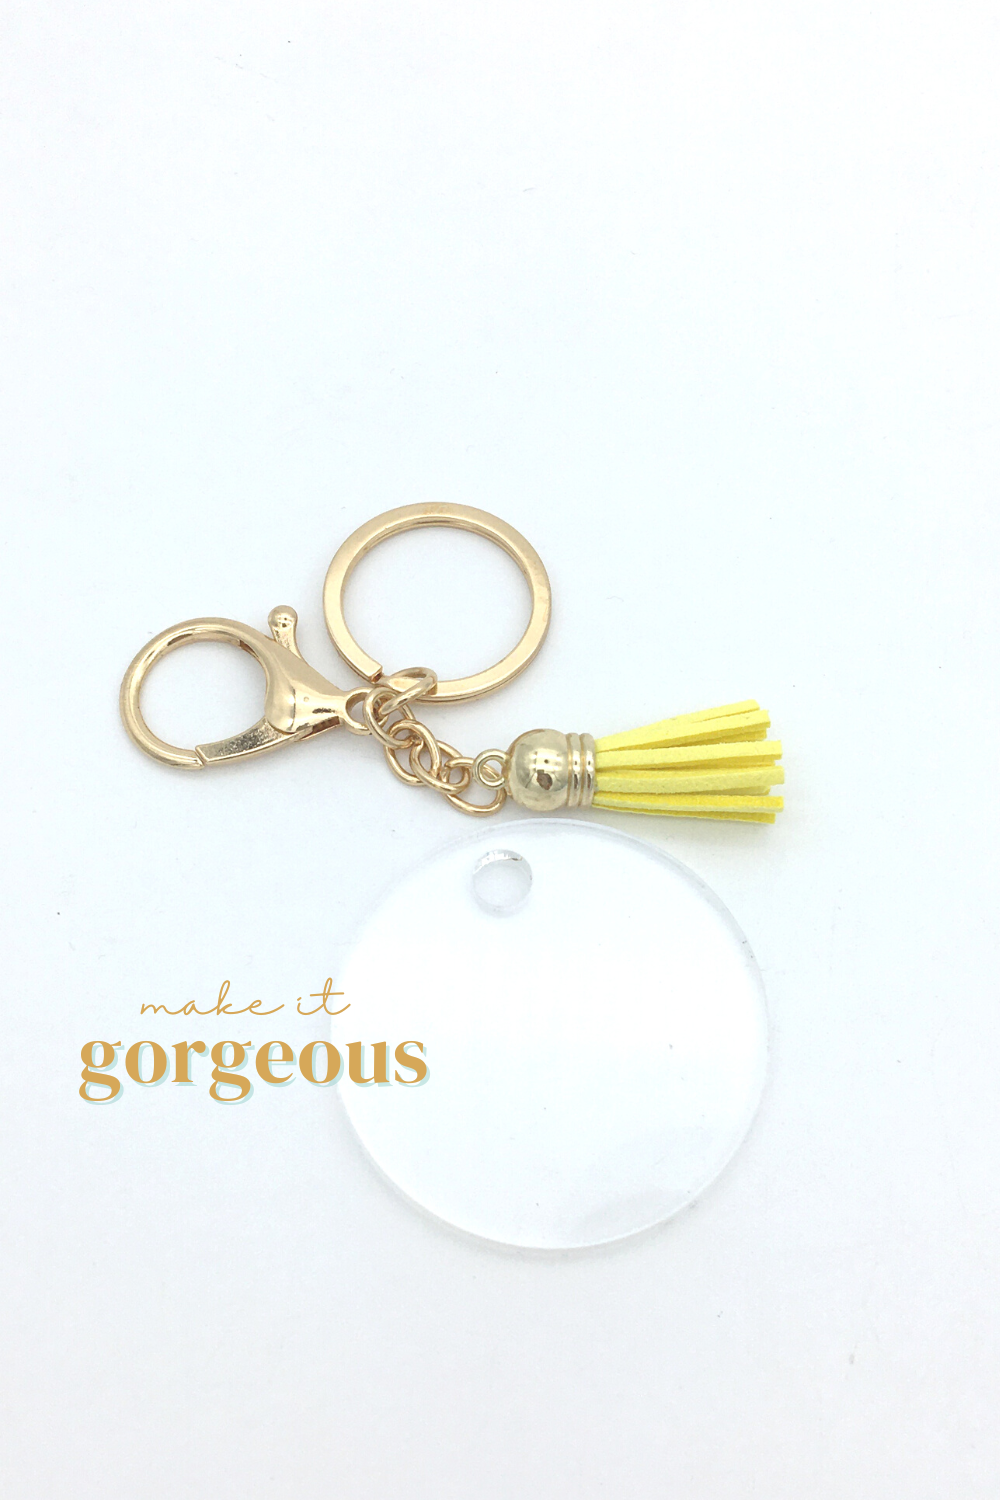 jocelyndieboltdesign Small Business Owner Acrylic Keychain with Tassel and Gold Clip | Gift Birthday  Seller Rainbow Yellow Clear Keyring Accessories Keys